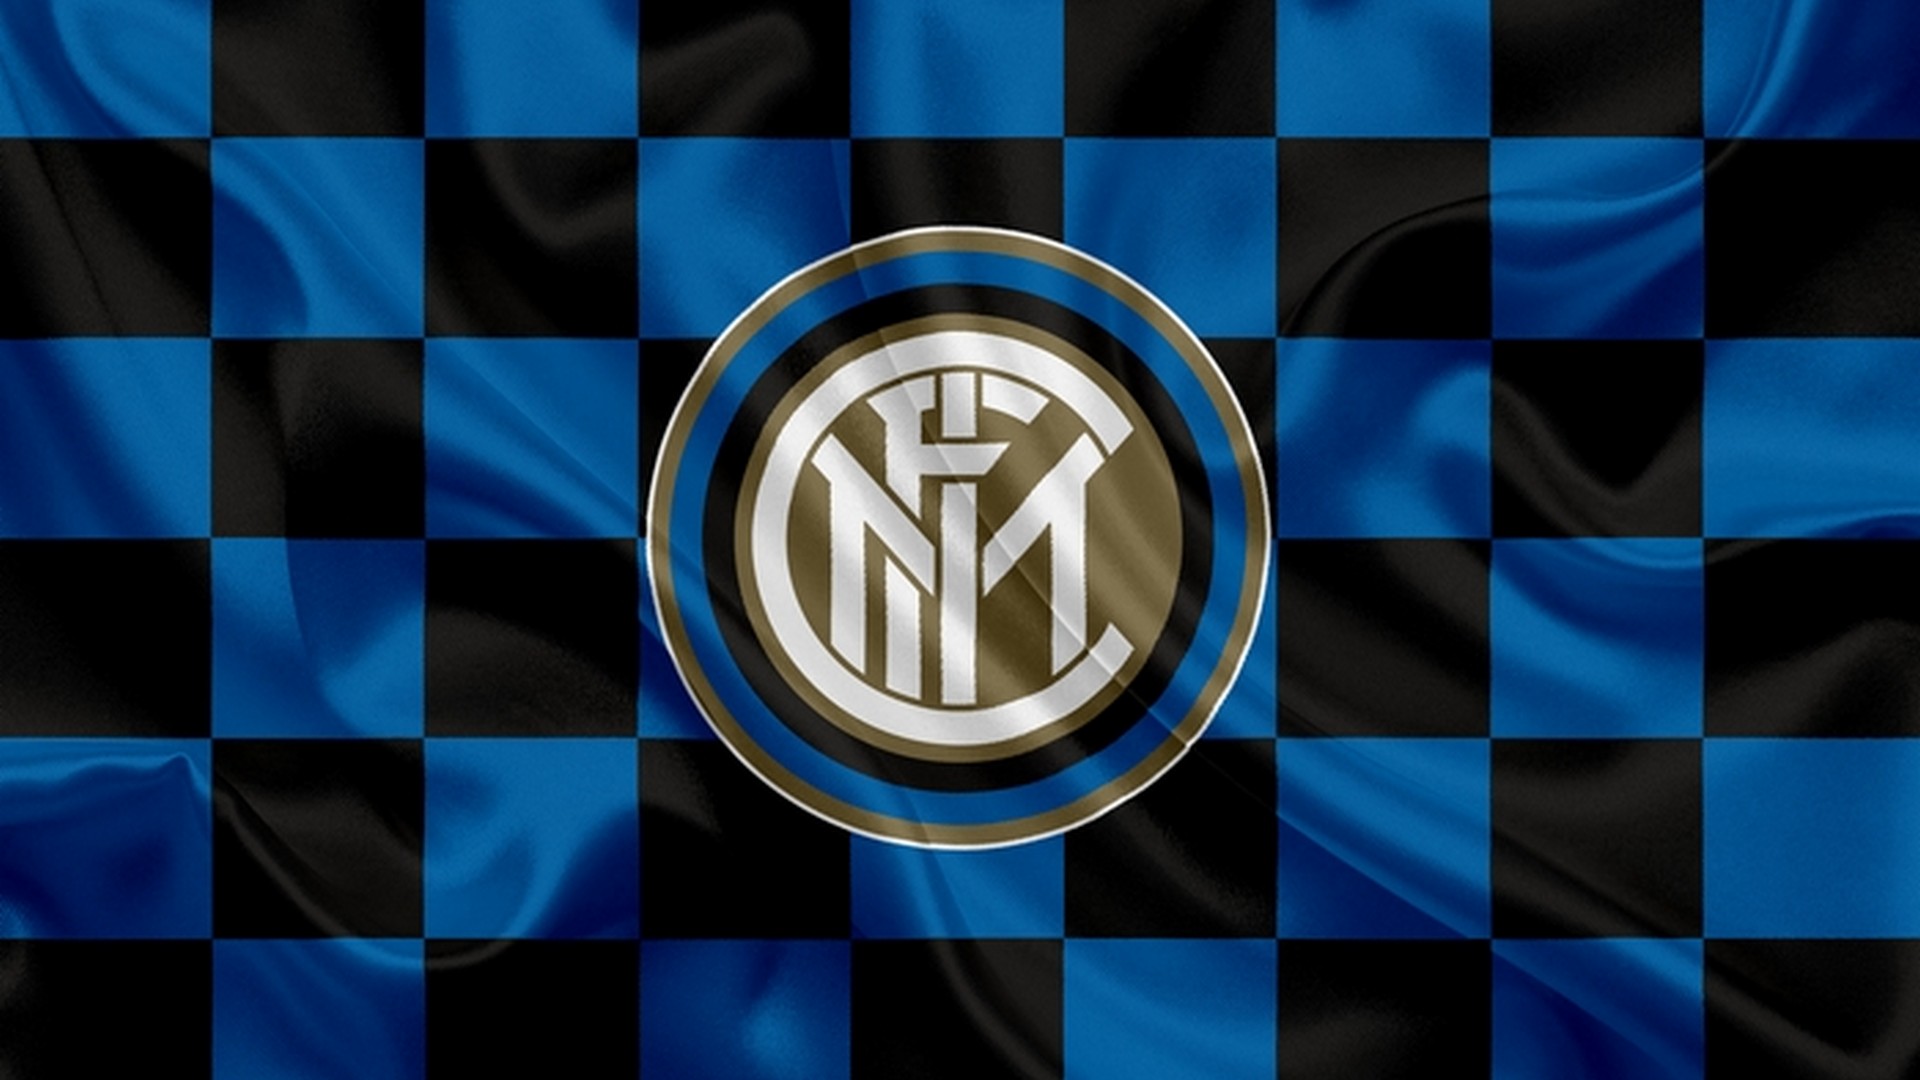 Wallpapers HD Inter Milan with high-resolution 1920x1080 pixel. You can use this wallpaper for your Desktop Computers, Mac Screensavers, Windows Backgrounds, iPhone Wallpapers, Tablet or Android Lock screen and another Mobile device